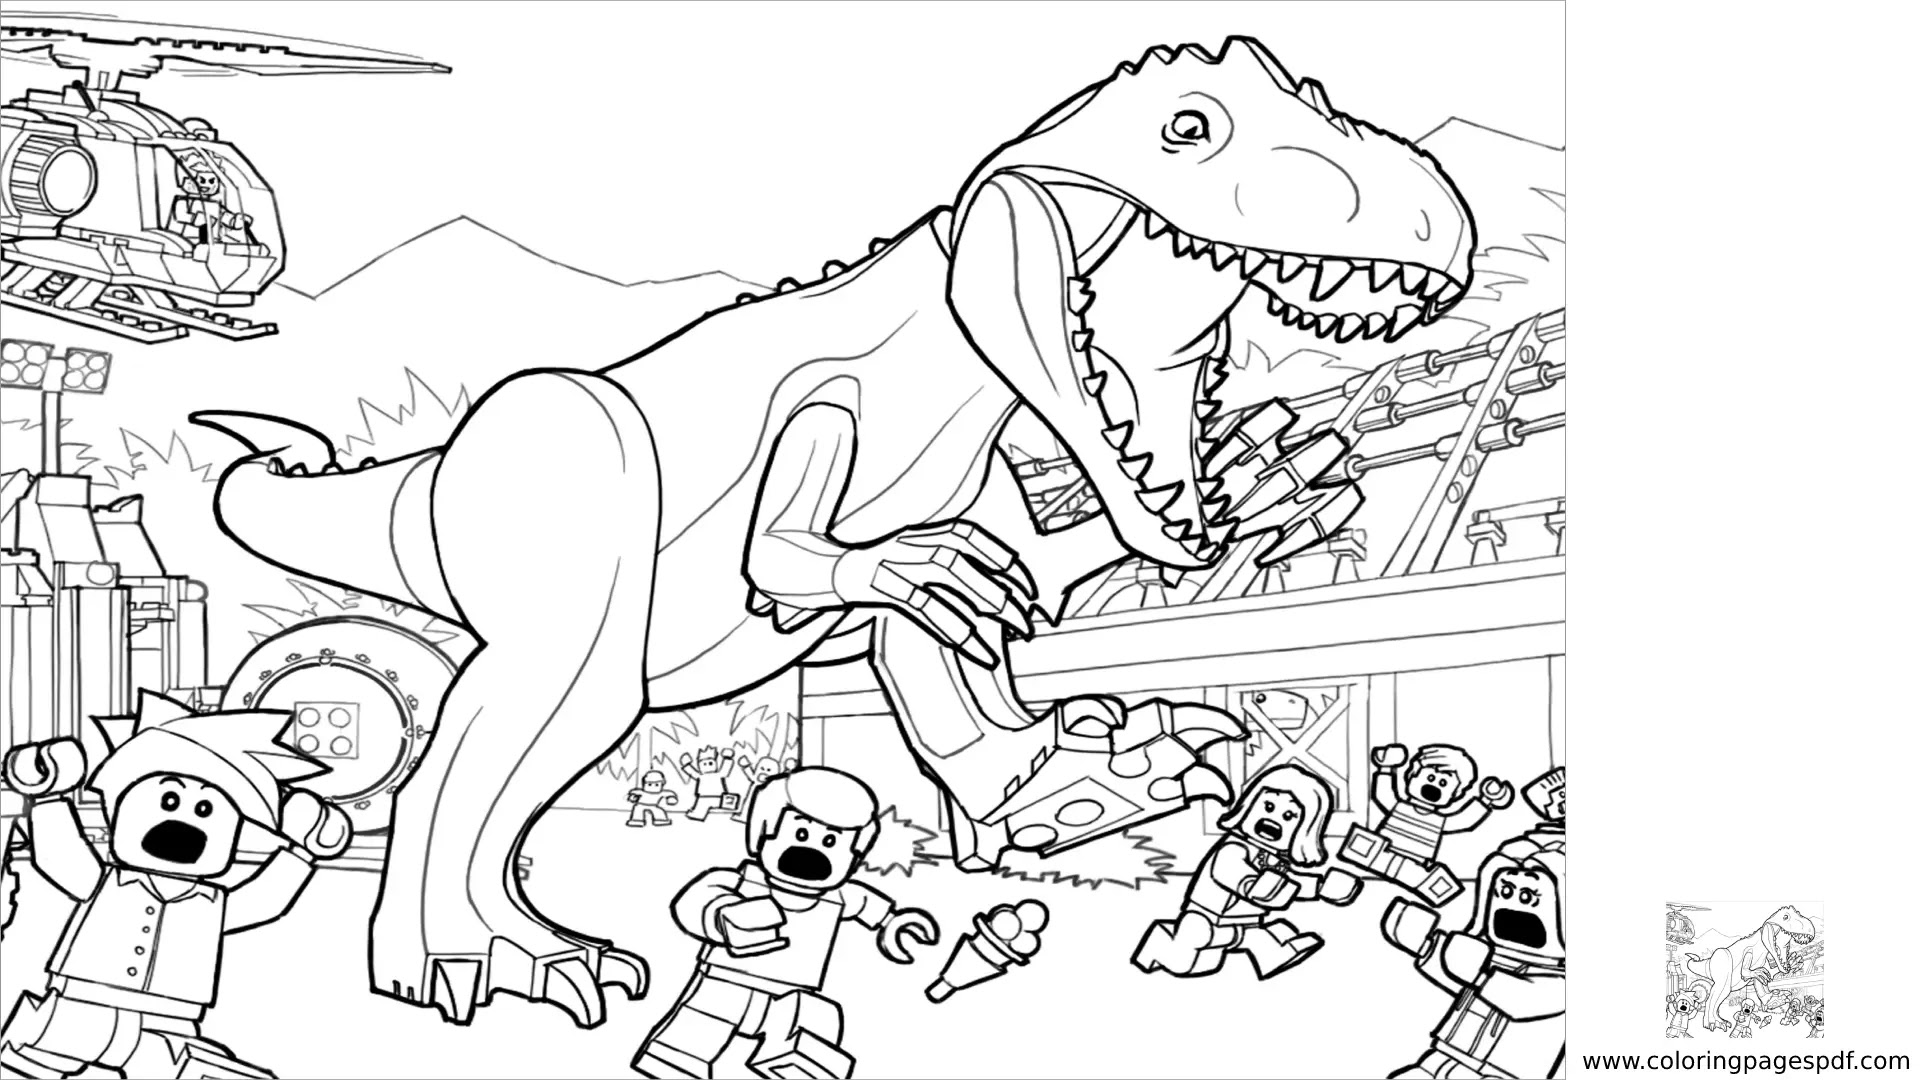 Coloring Pages Of Lego Jurassic Park